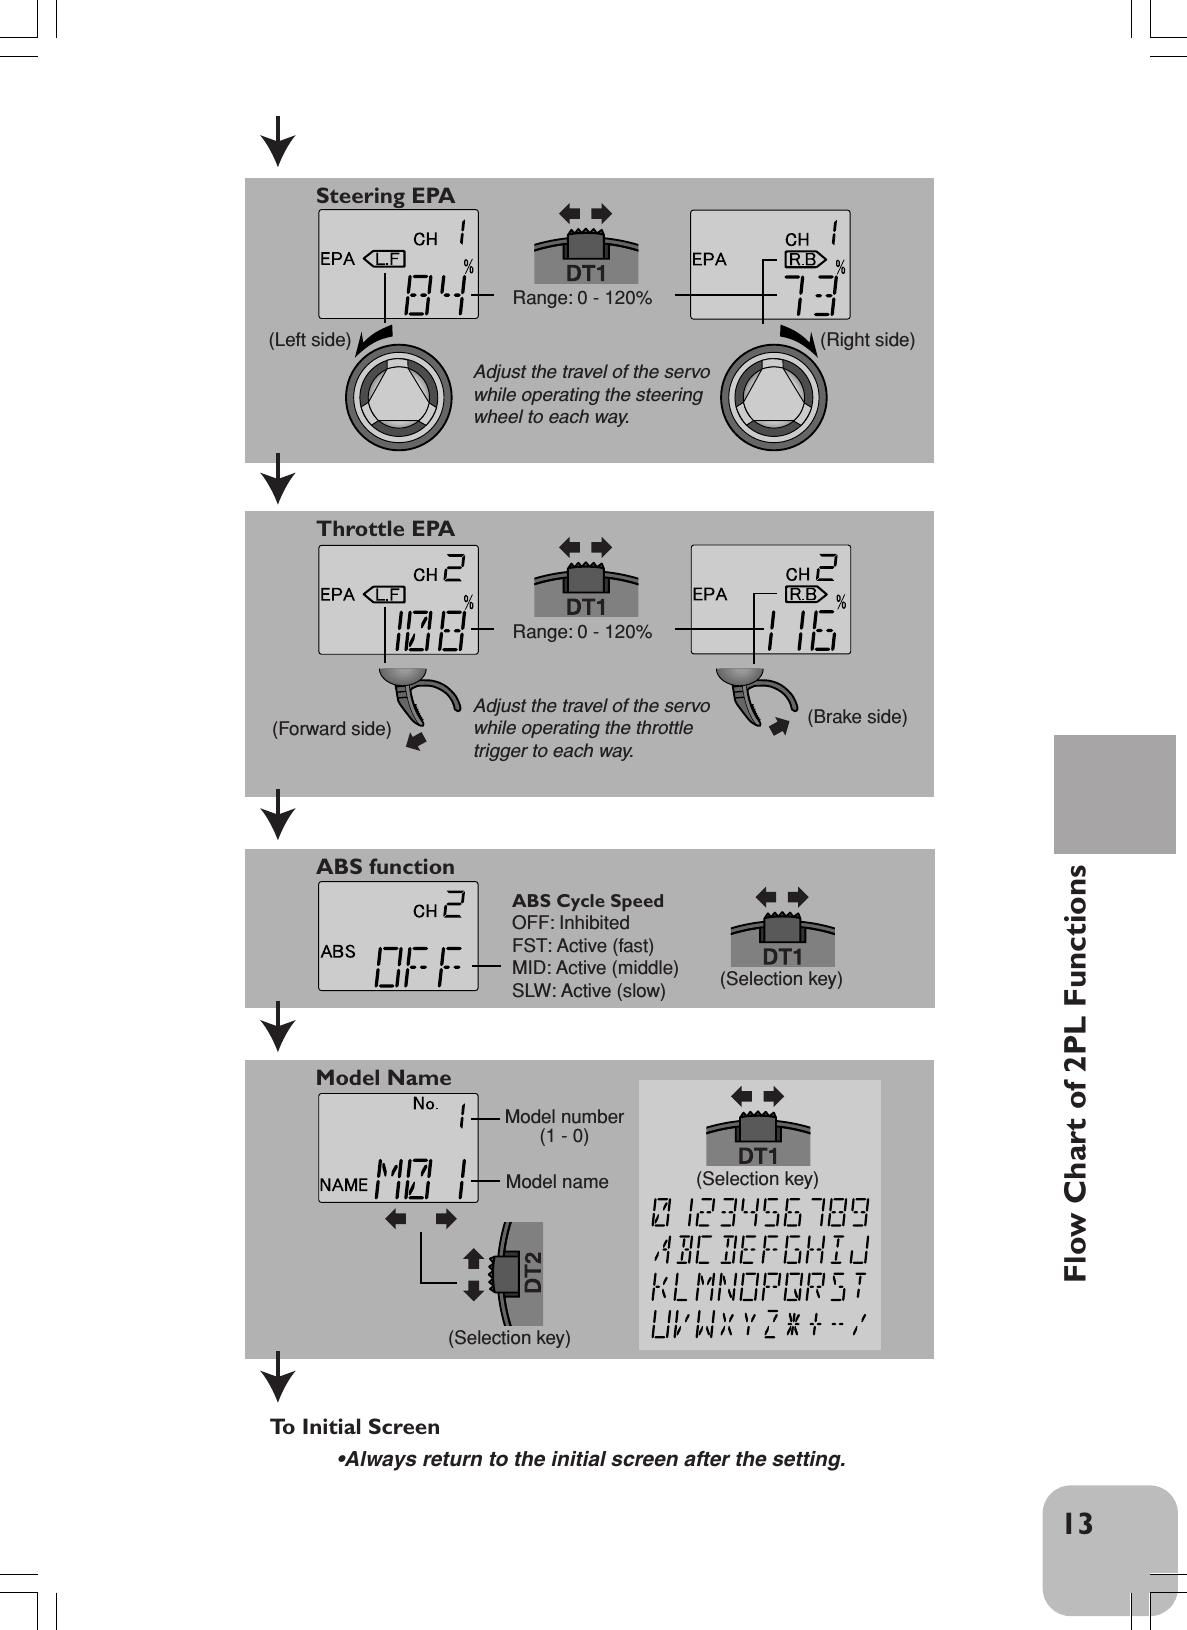 13Flow Chart of 2PL FunctionsSteering EPAAdjust the travel of the servowhile operating the steering wheel to each way.Throttle EPAAdjust the travel of the servowhile operating the throttle trigger to each way.To  Initial ScreenRange: 0 - 120%(Left side) (Right side)Range: 0 - 120%(Forward side) (Brake side)ABS Cycle SpeedOFF: InhibitedFST: Active (fast)MID: Active (middle)SLW: Active (slow) ABS functionModel Name(Selection key)(Selection key)(Selection key)Model number(1 - 0)Model name•Always return to the initial screen after the setting.